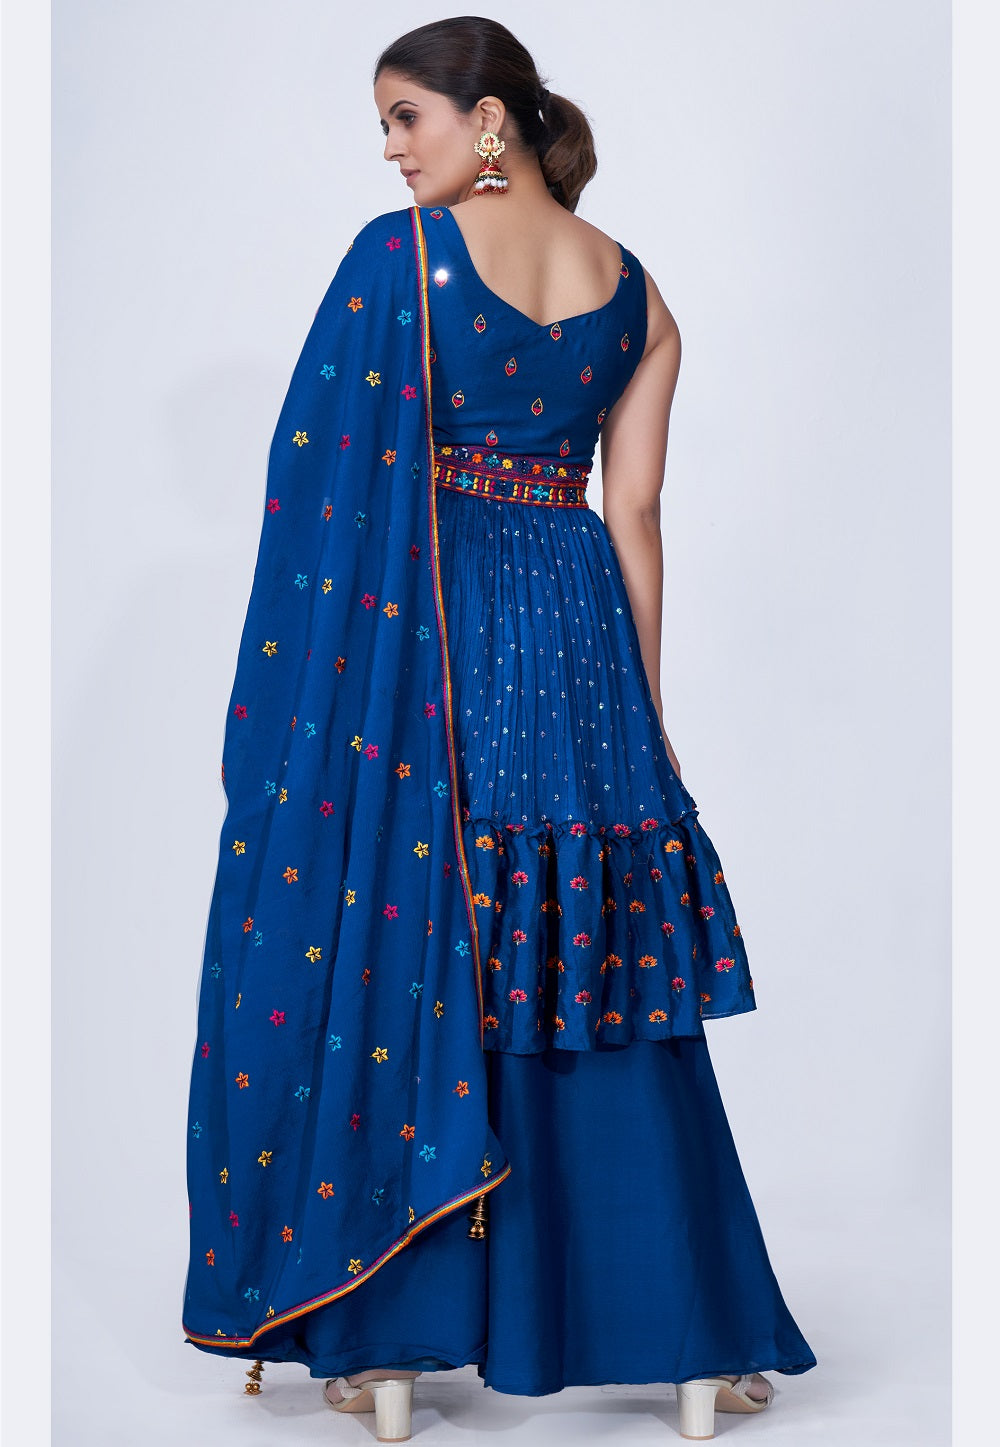 Chinon Chiffon Embroidered Pakistani Suit in Navy Blue